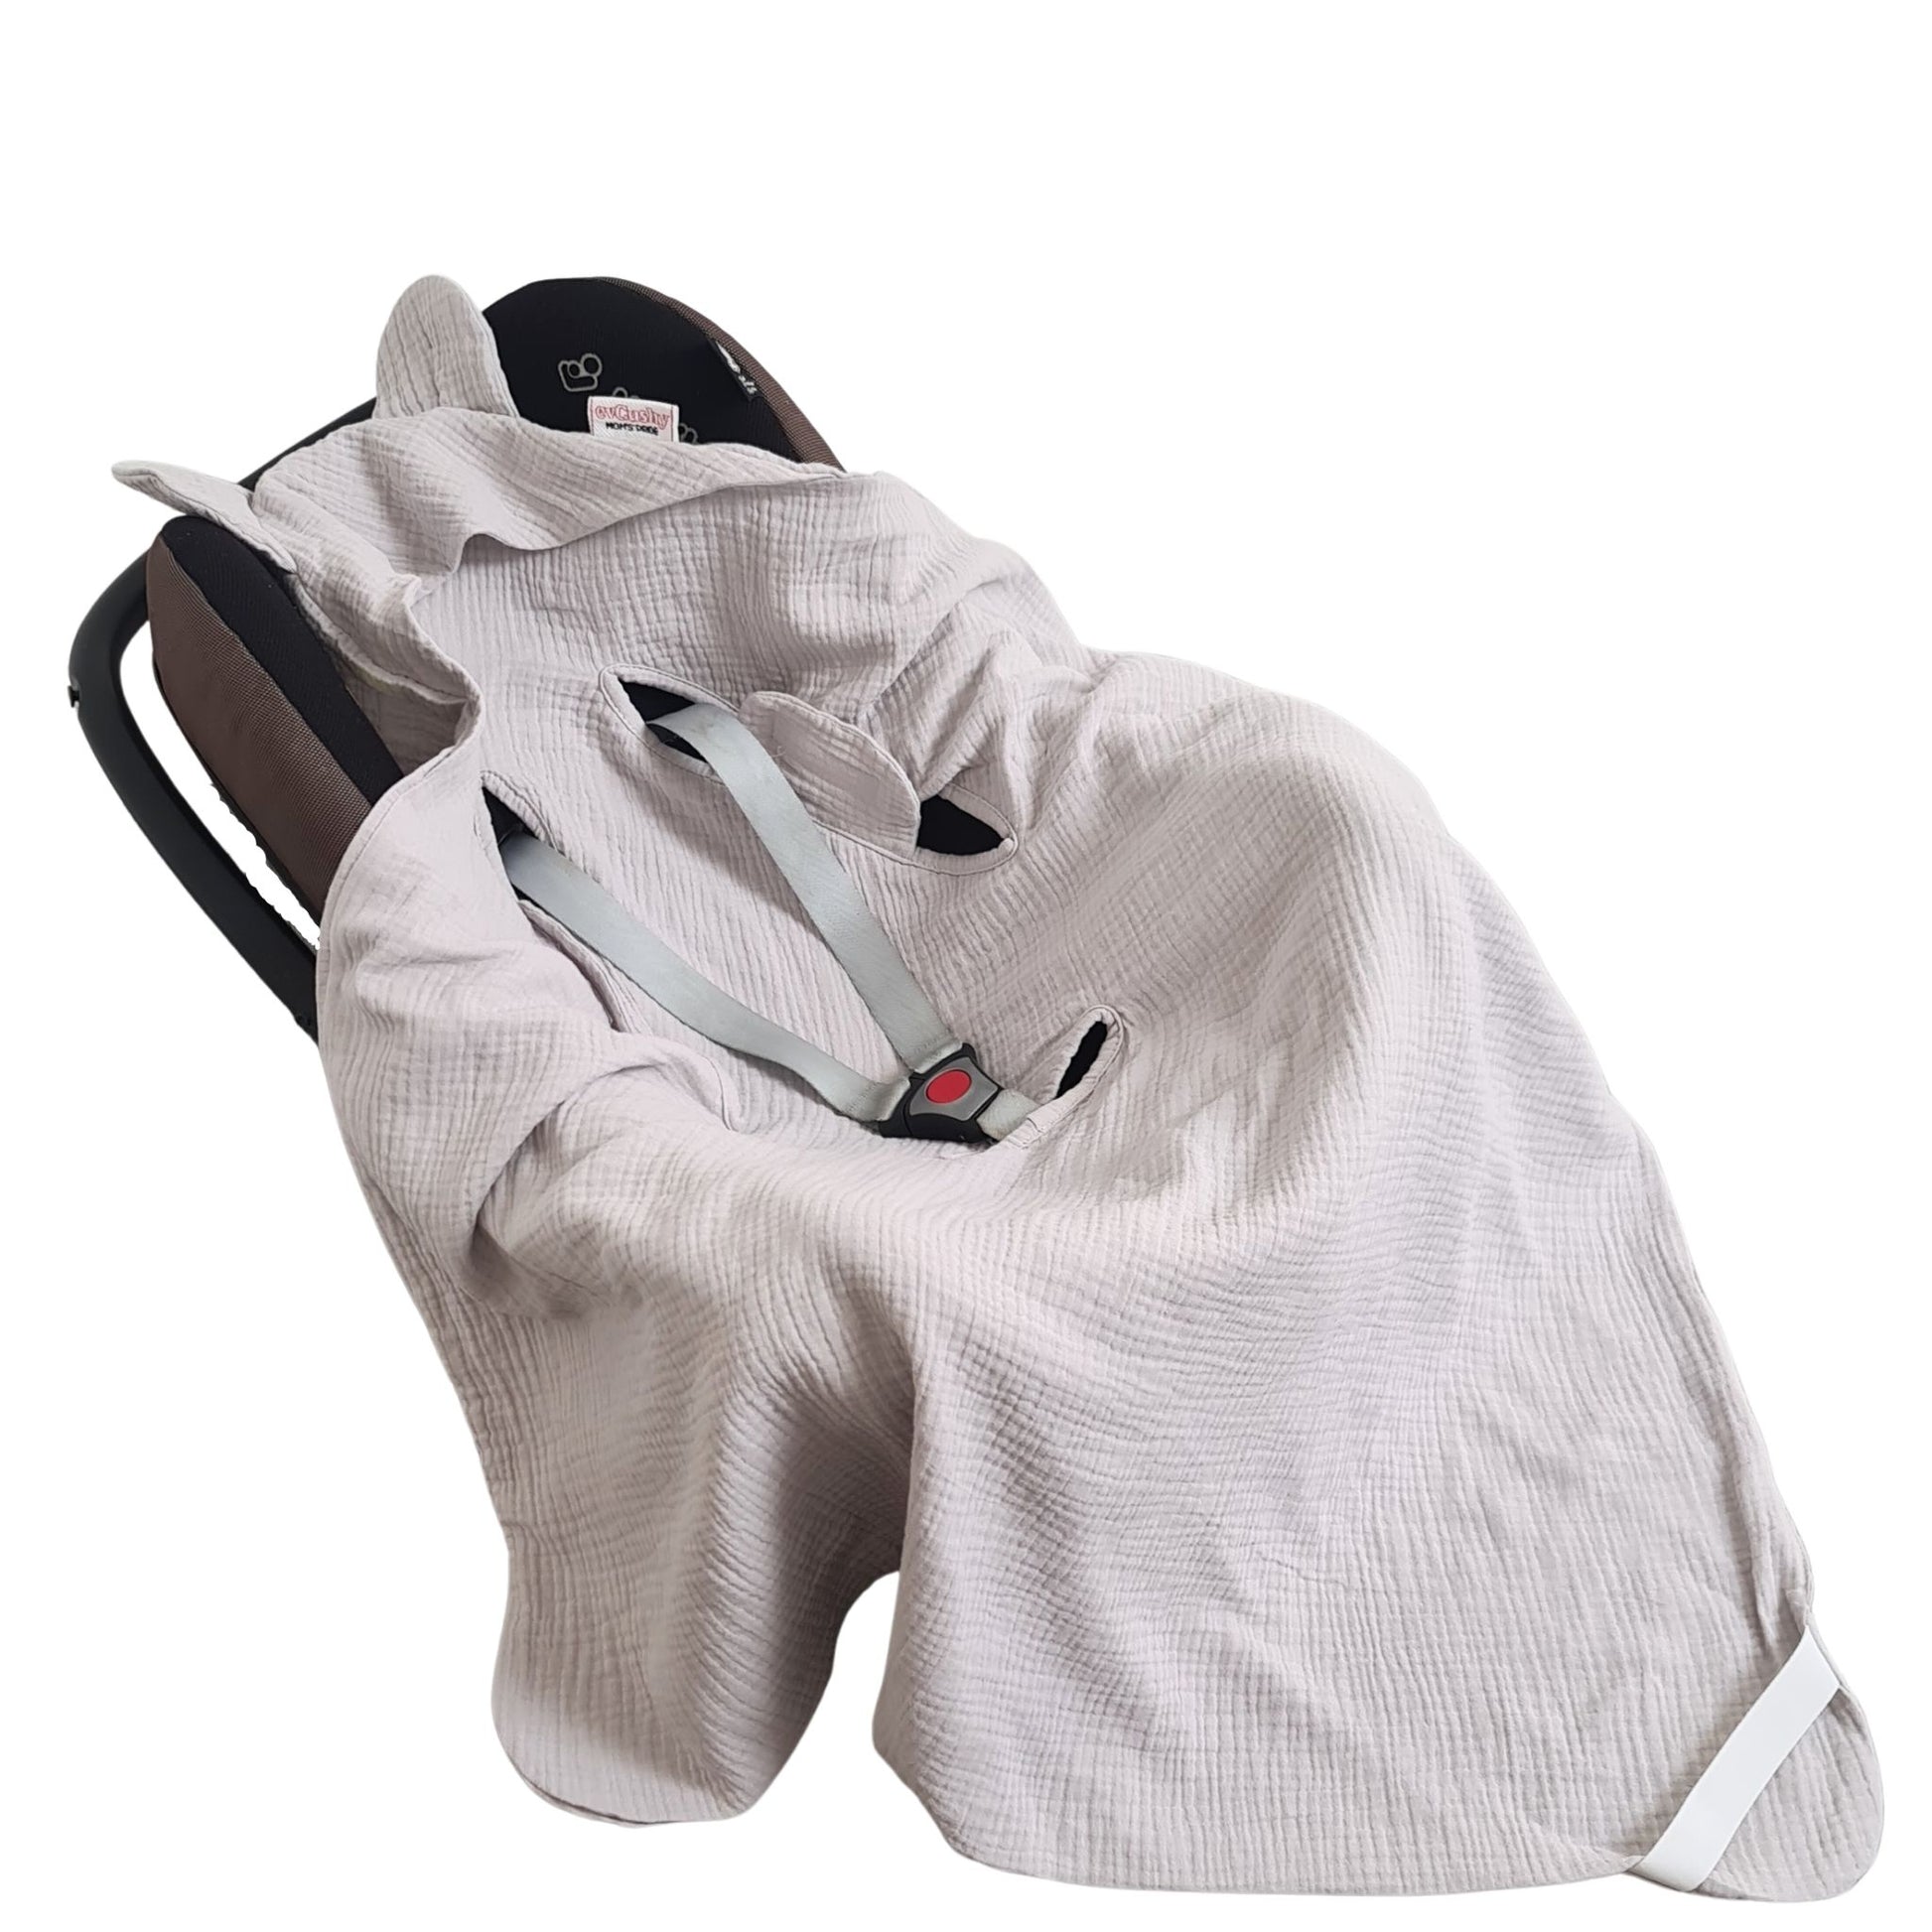 grey blanket with hood and ears. Fits car seat 3 and 5 point harness system 0-12 months